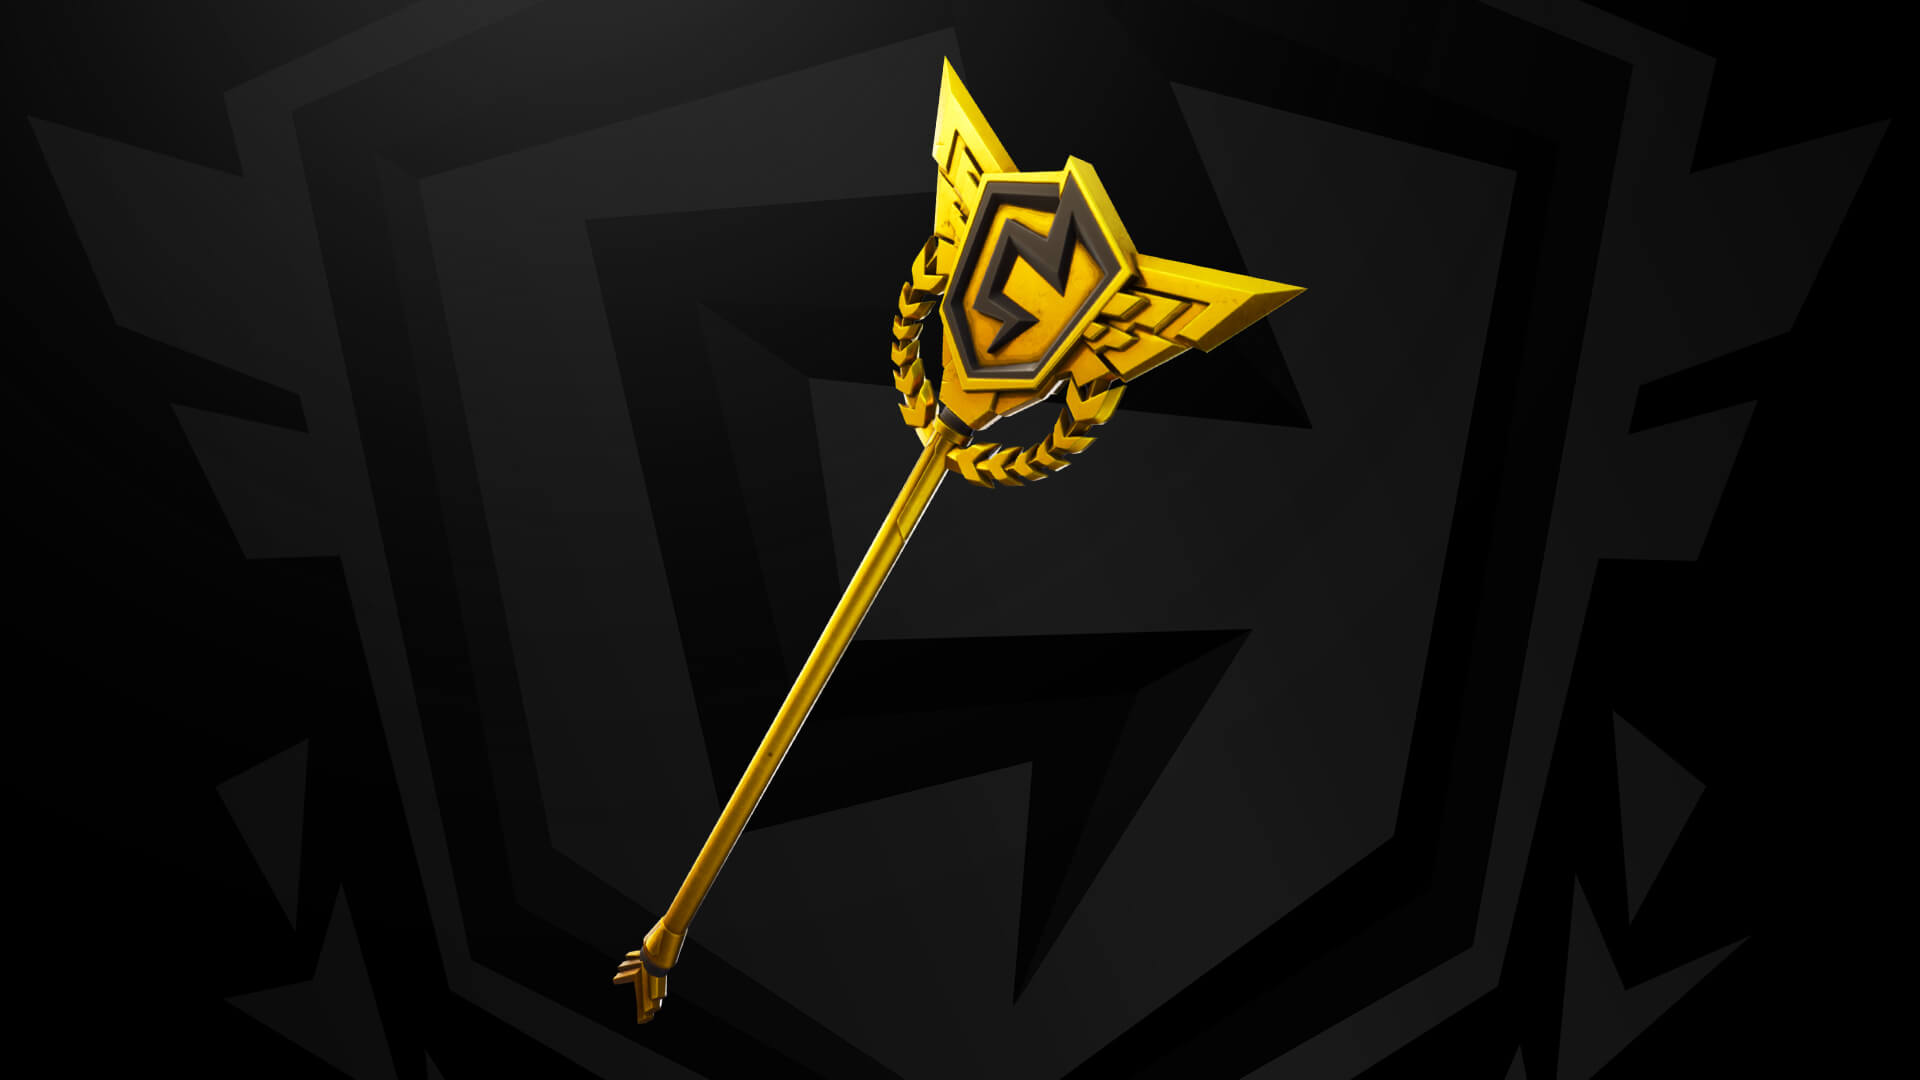 Fortnite reveals the Axe of Champions 2.0